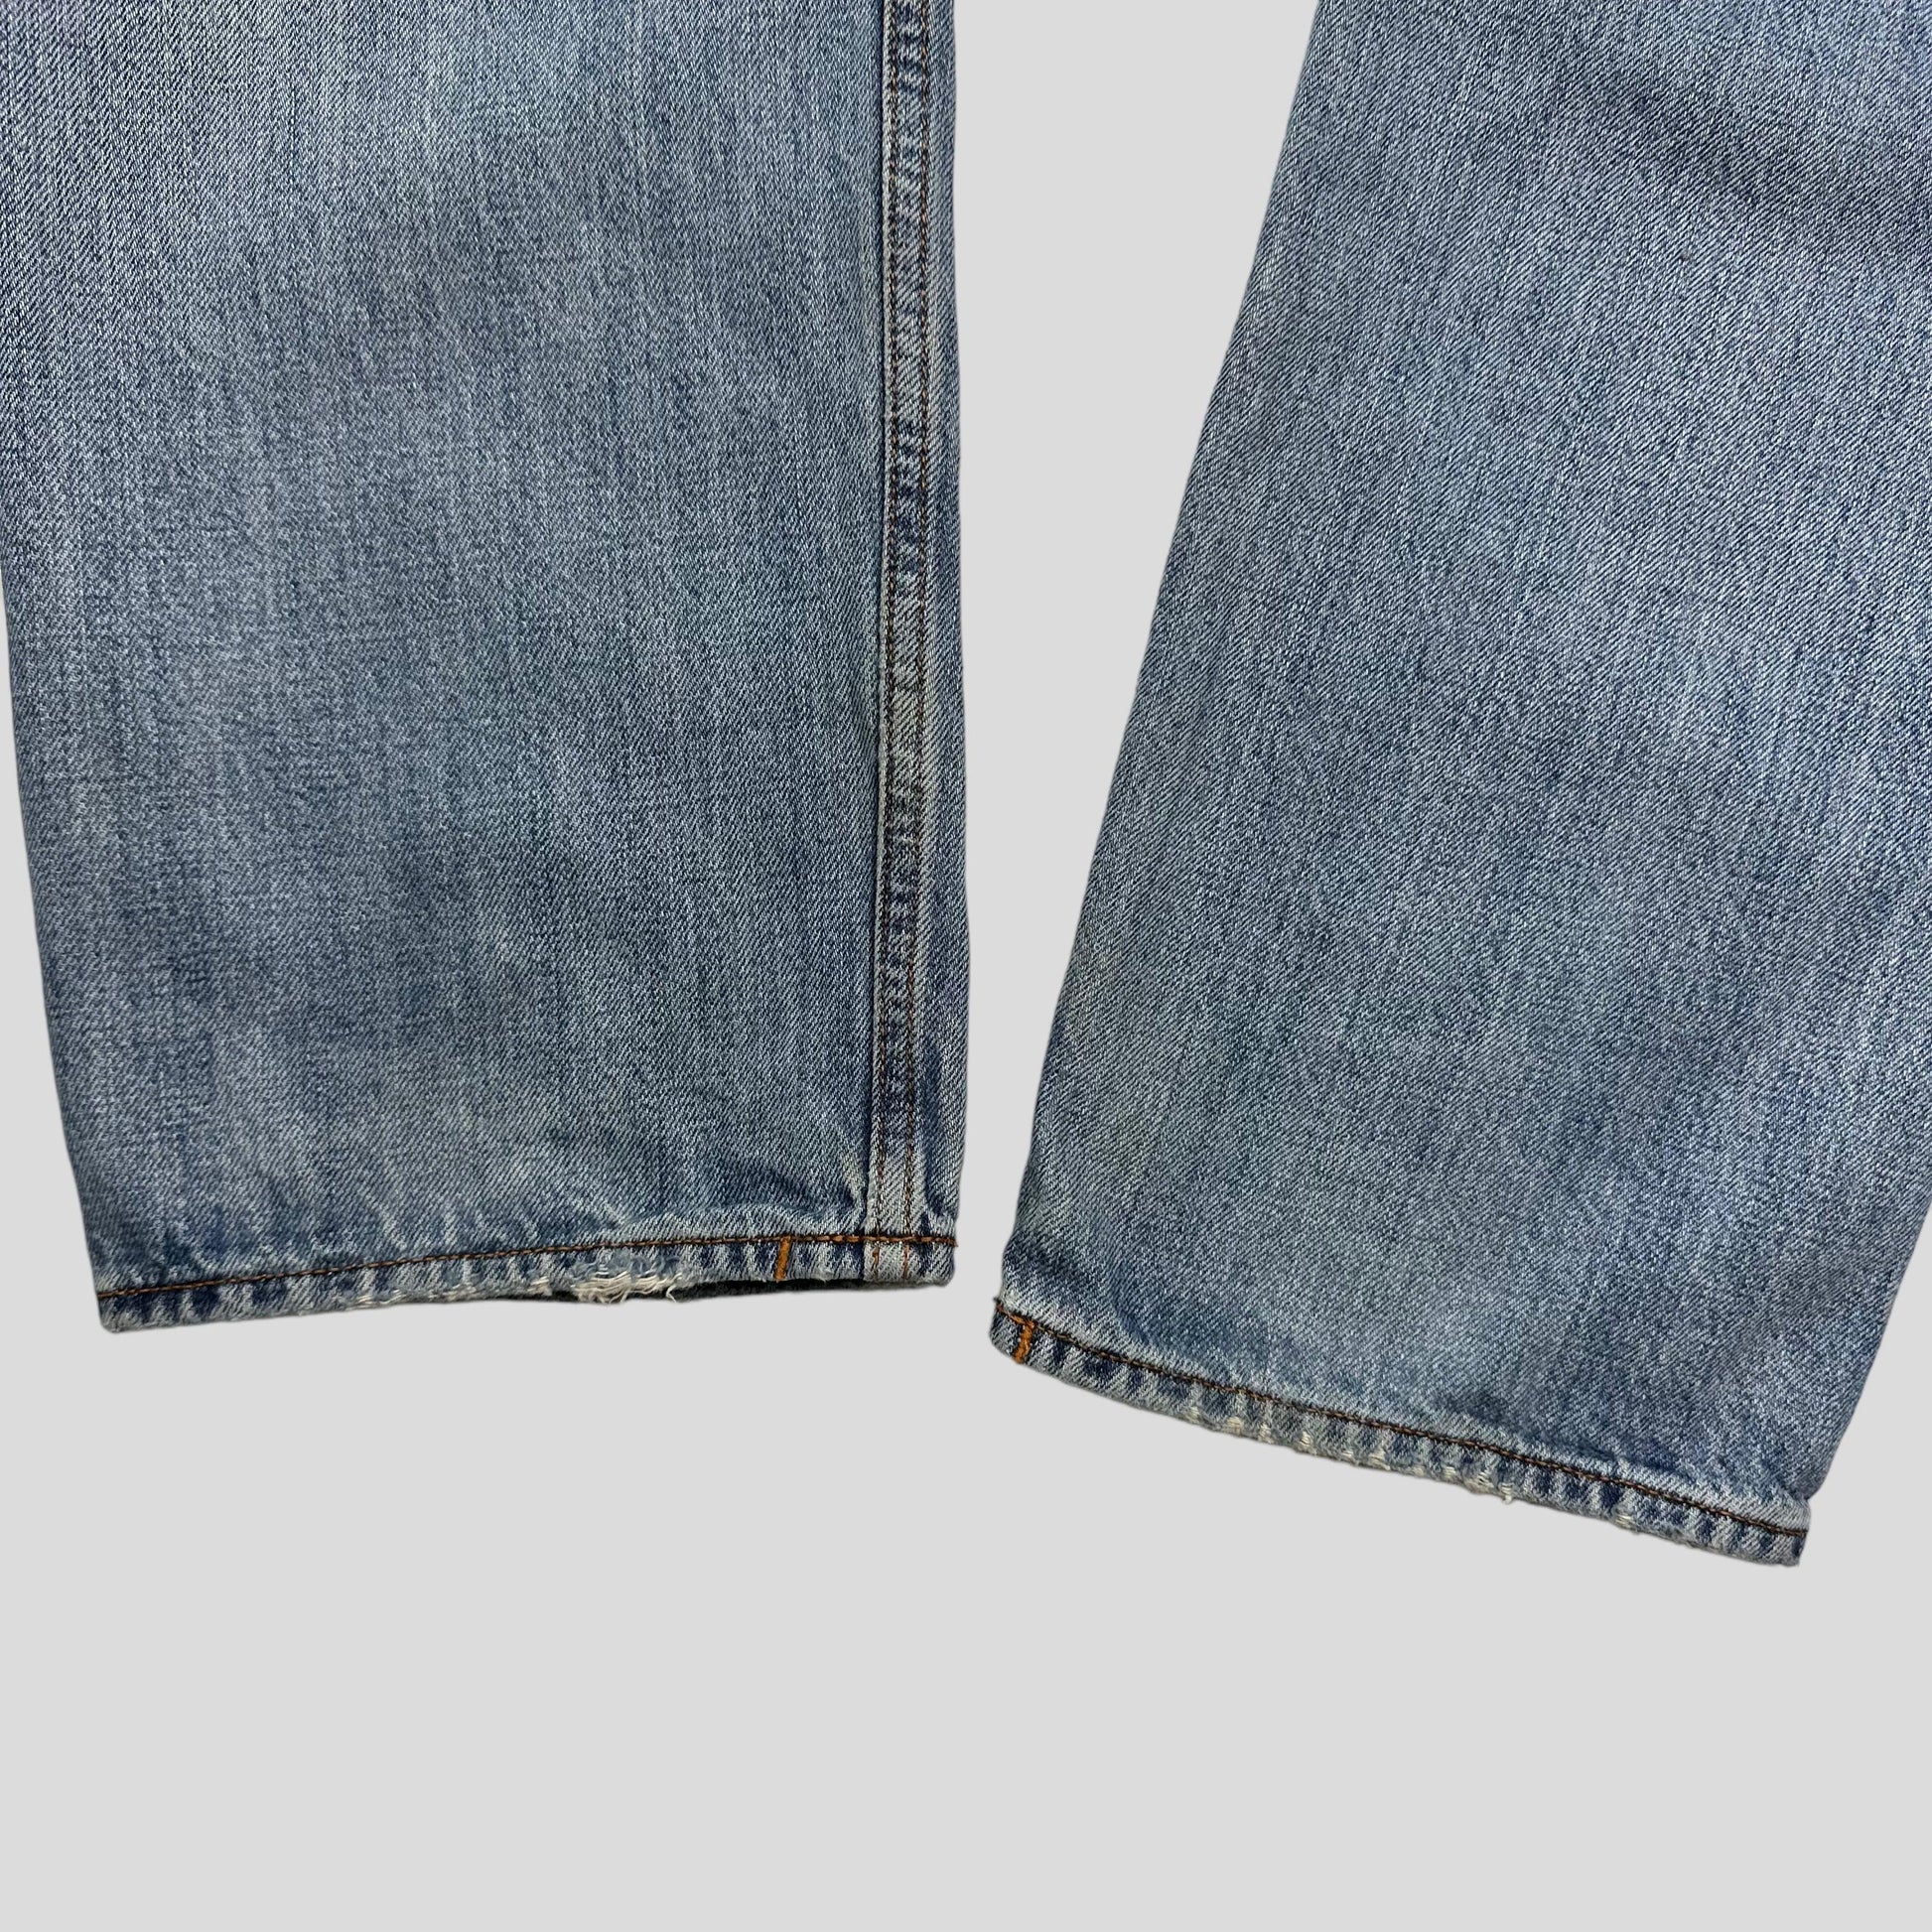 Stone Island SS13 Light Blue Wash Jeans - 34-36 - Known Source